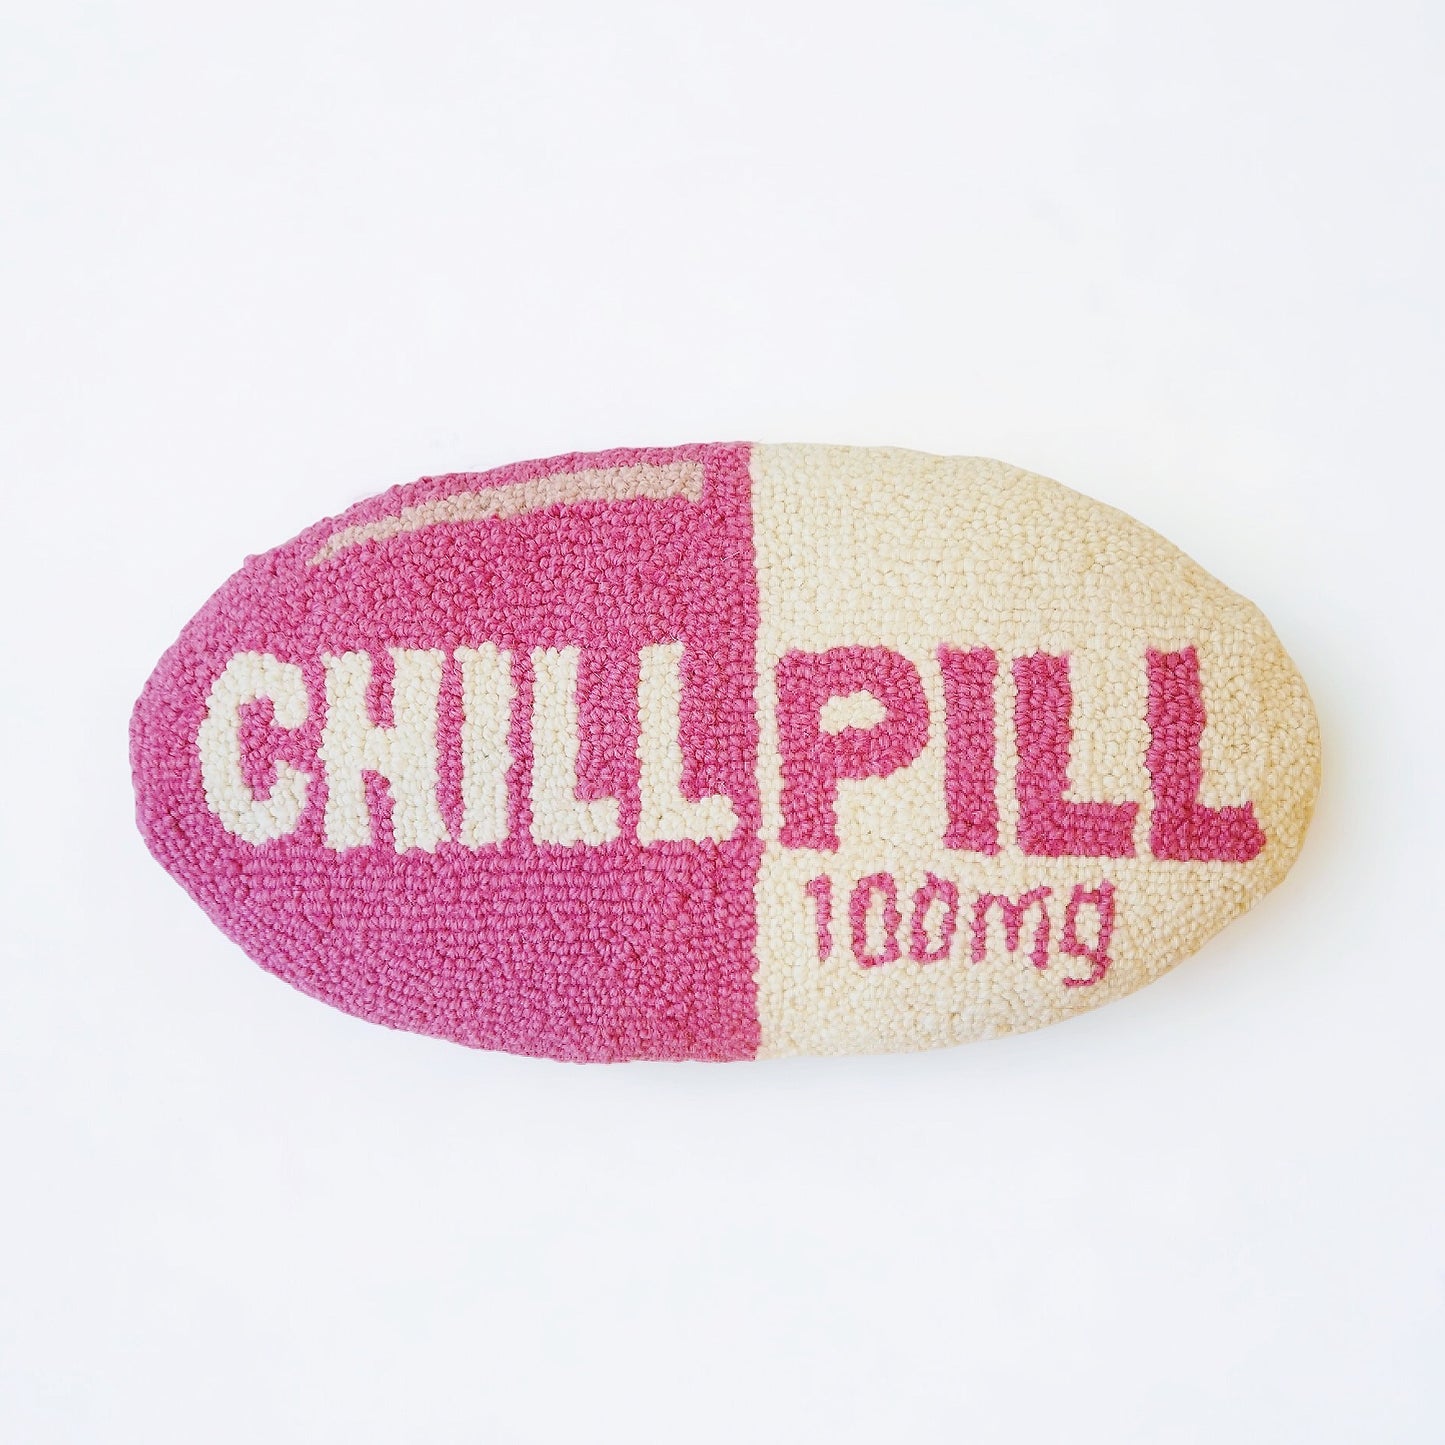 Chill Pill Hooked Pillow